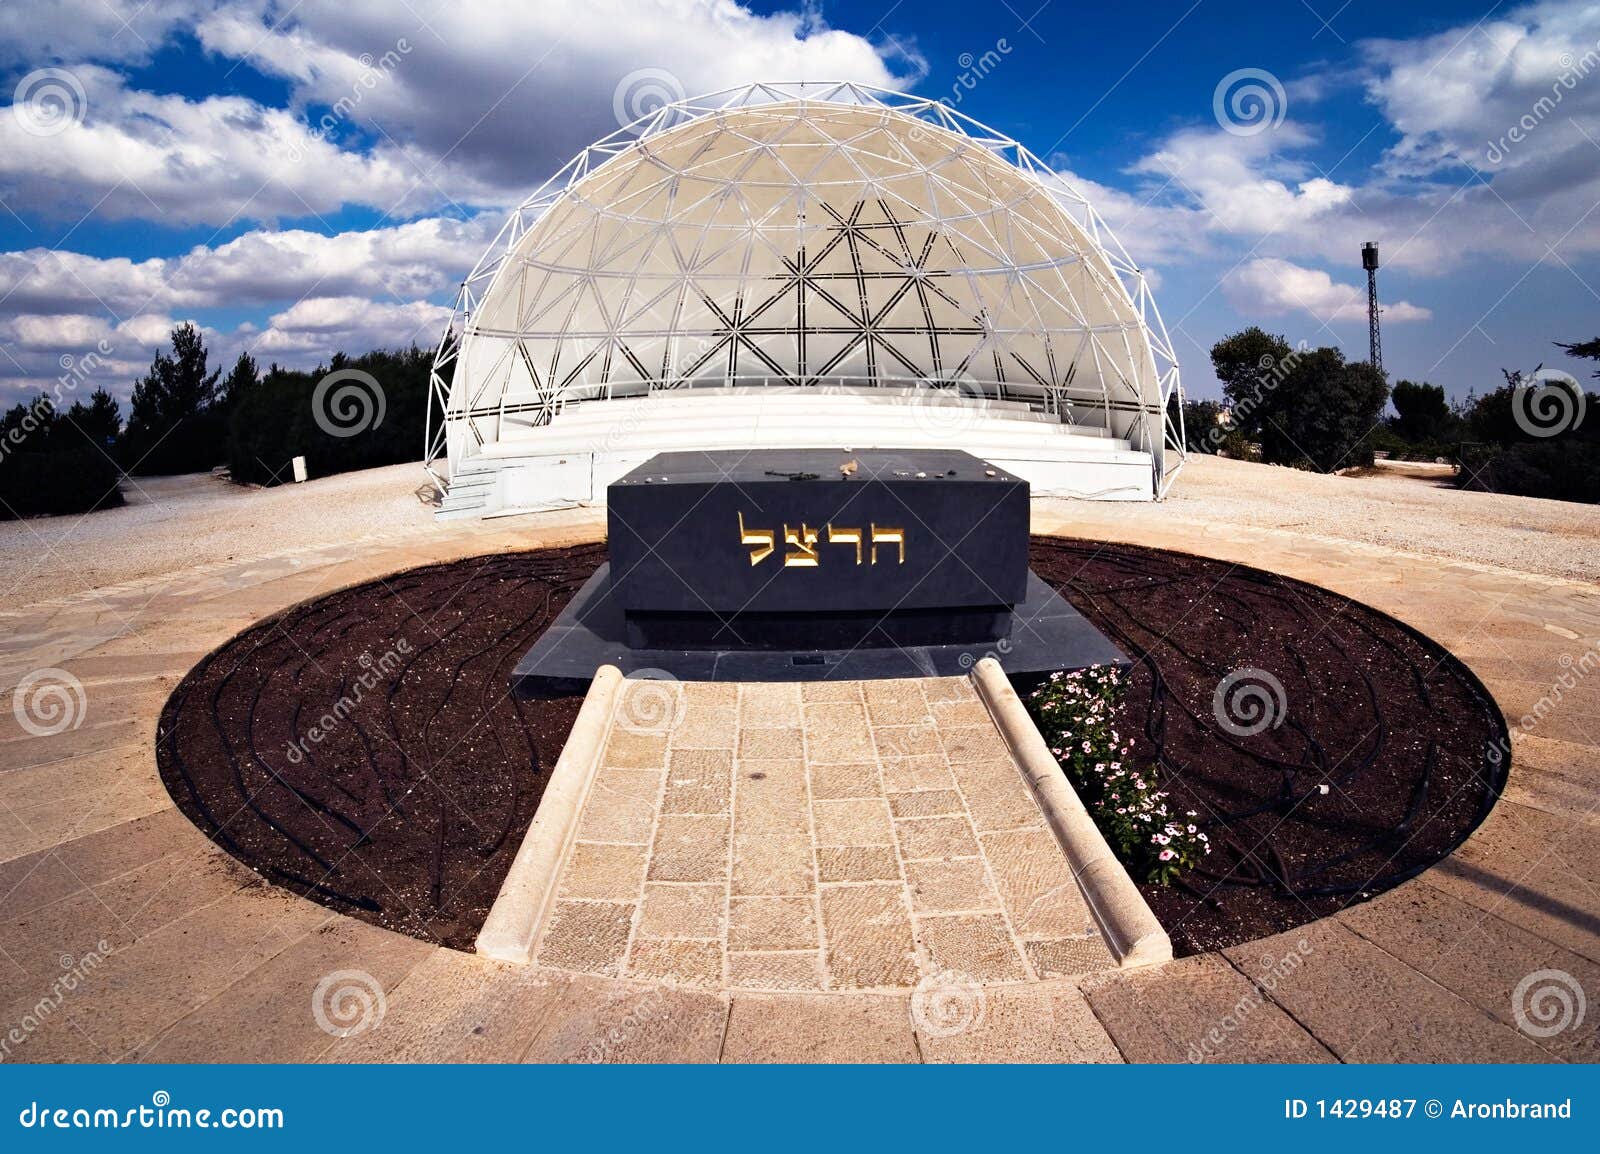 grave of theodor herzl, the founder of the zionist movement